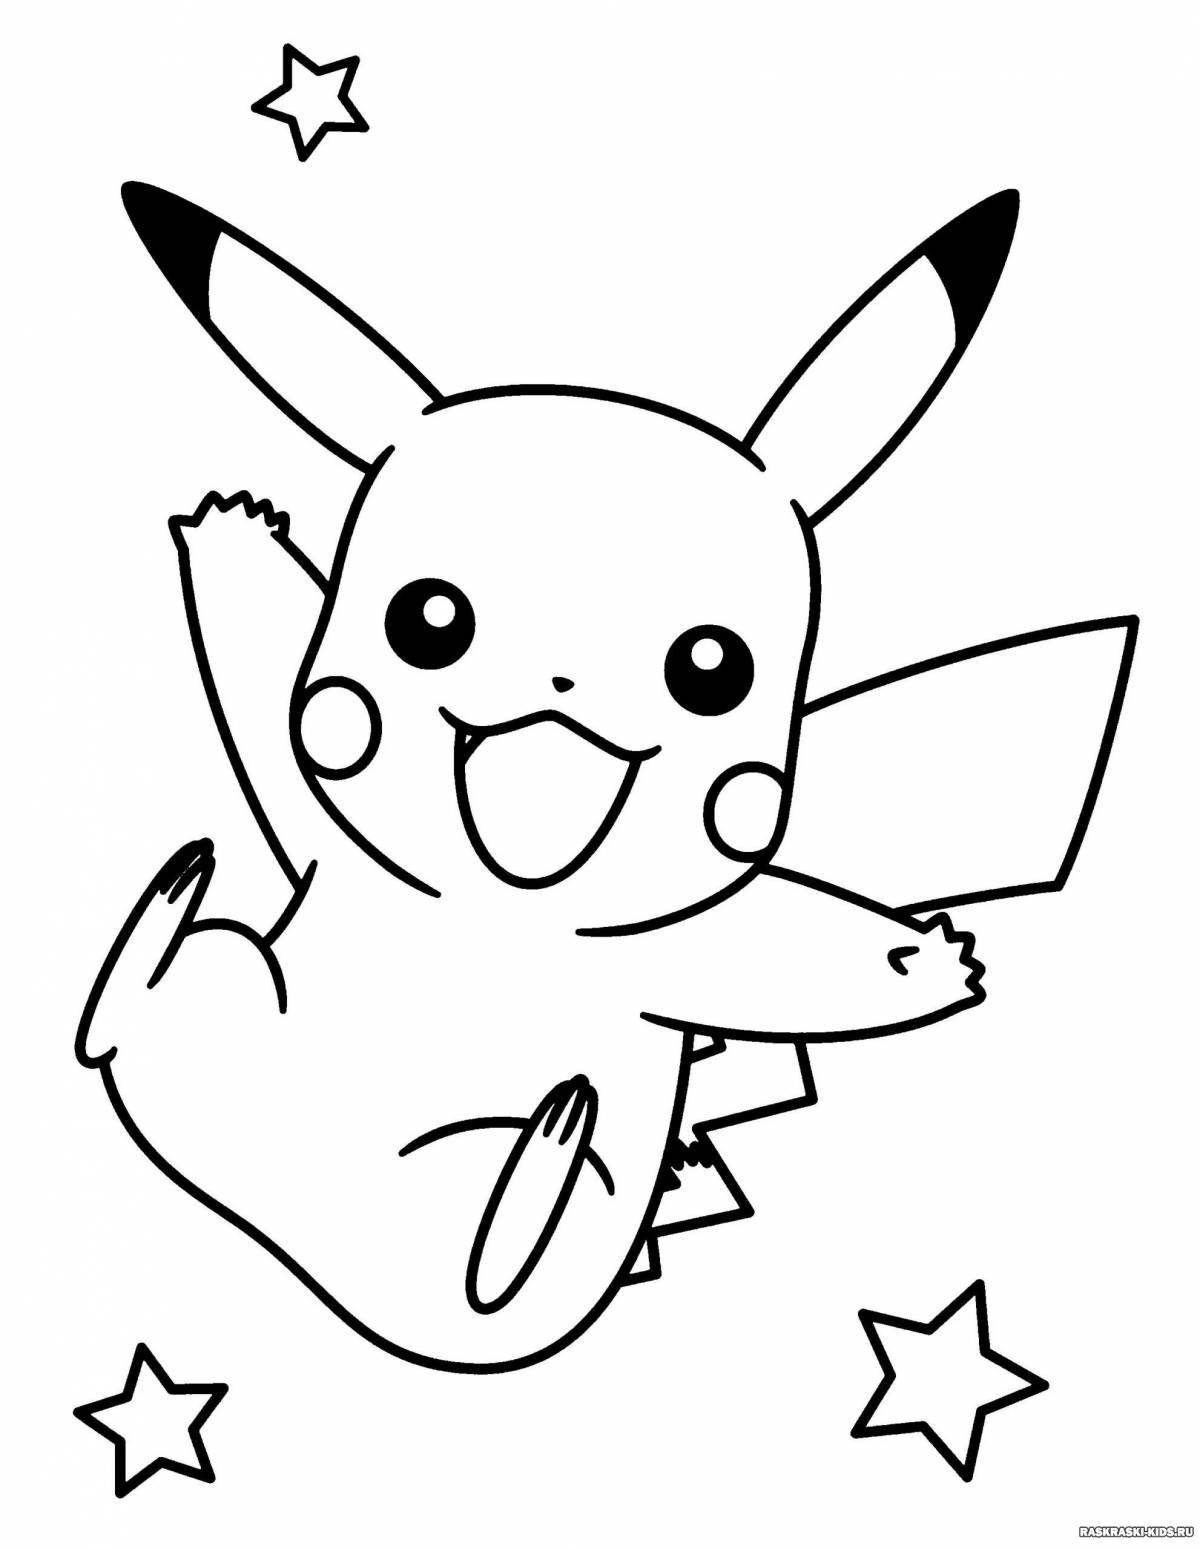 Attractive pikachu coloring page